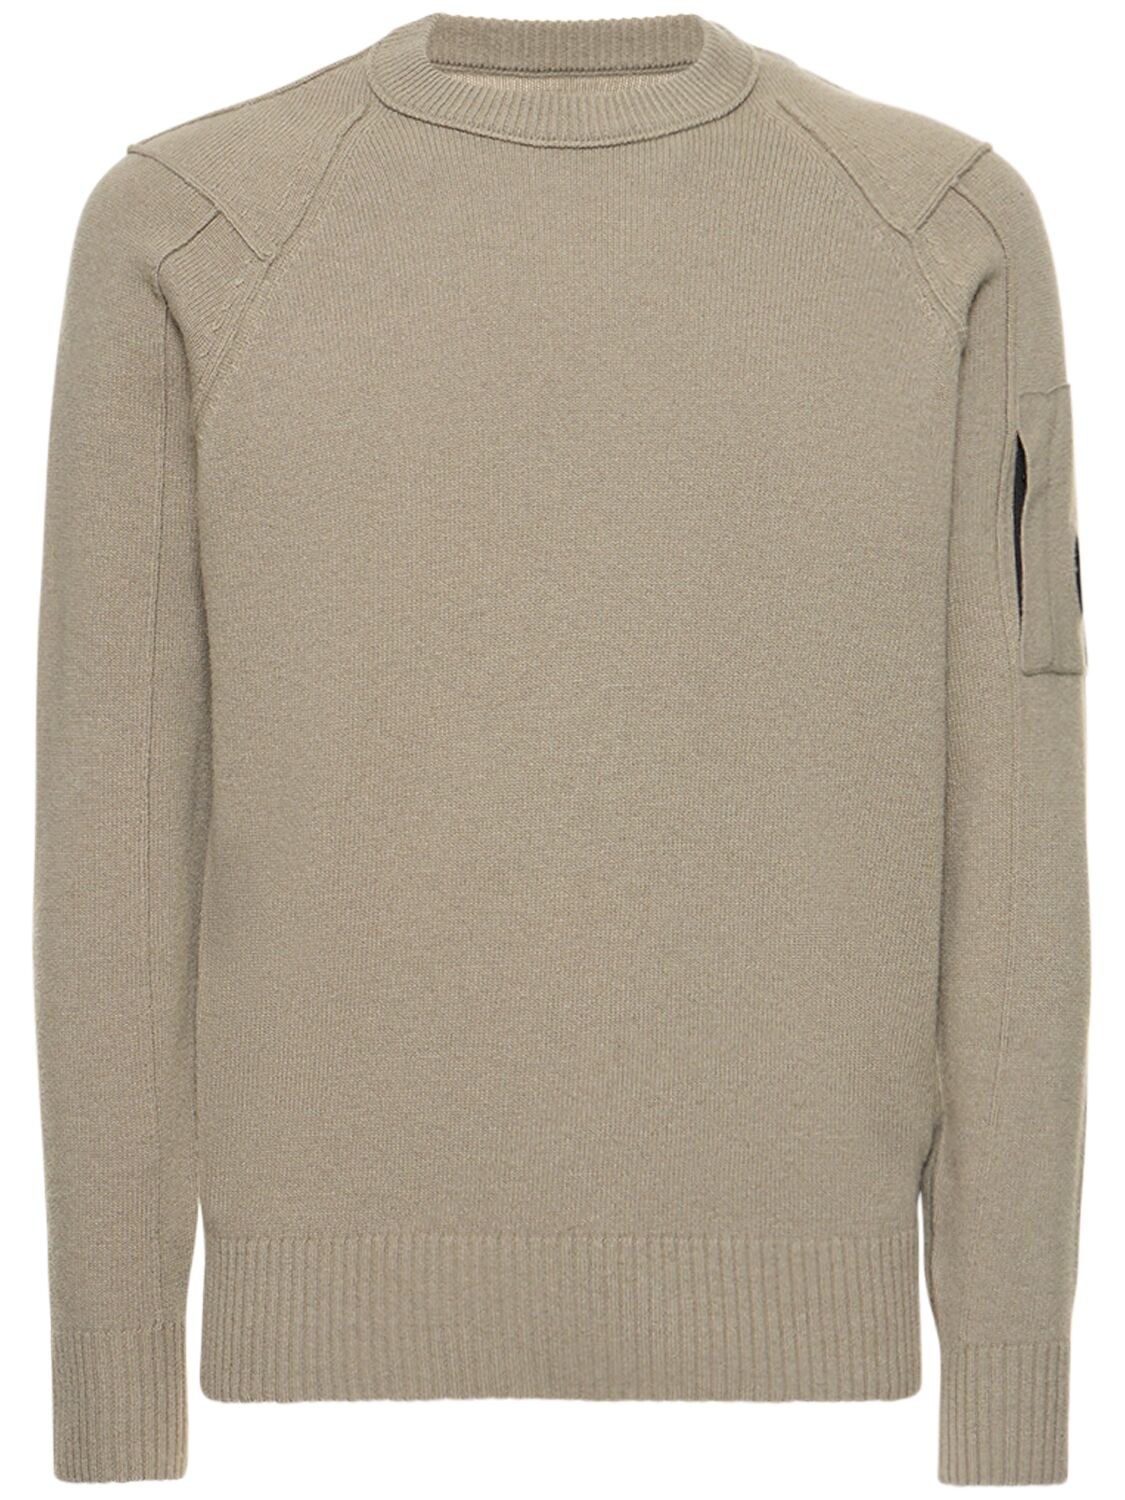 C.p. Company Wool Blend Knit Sweater In Silver Sage